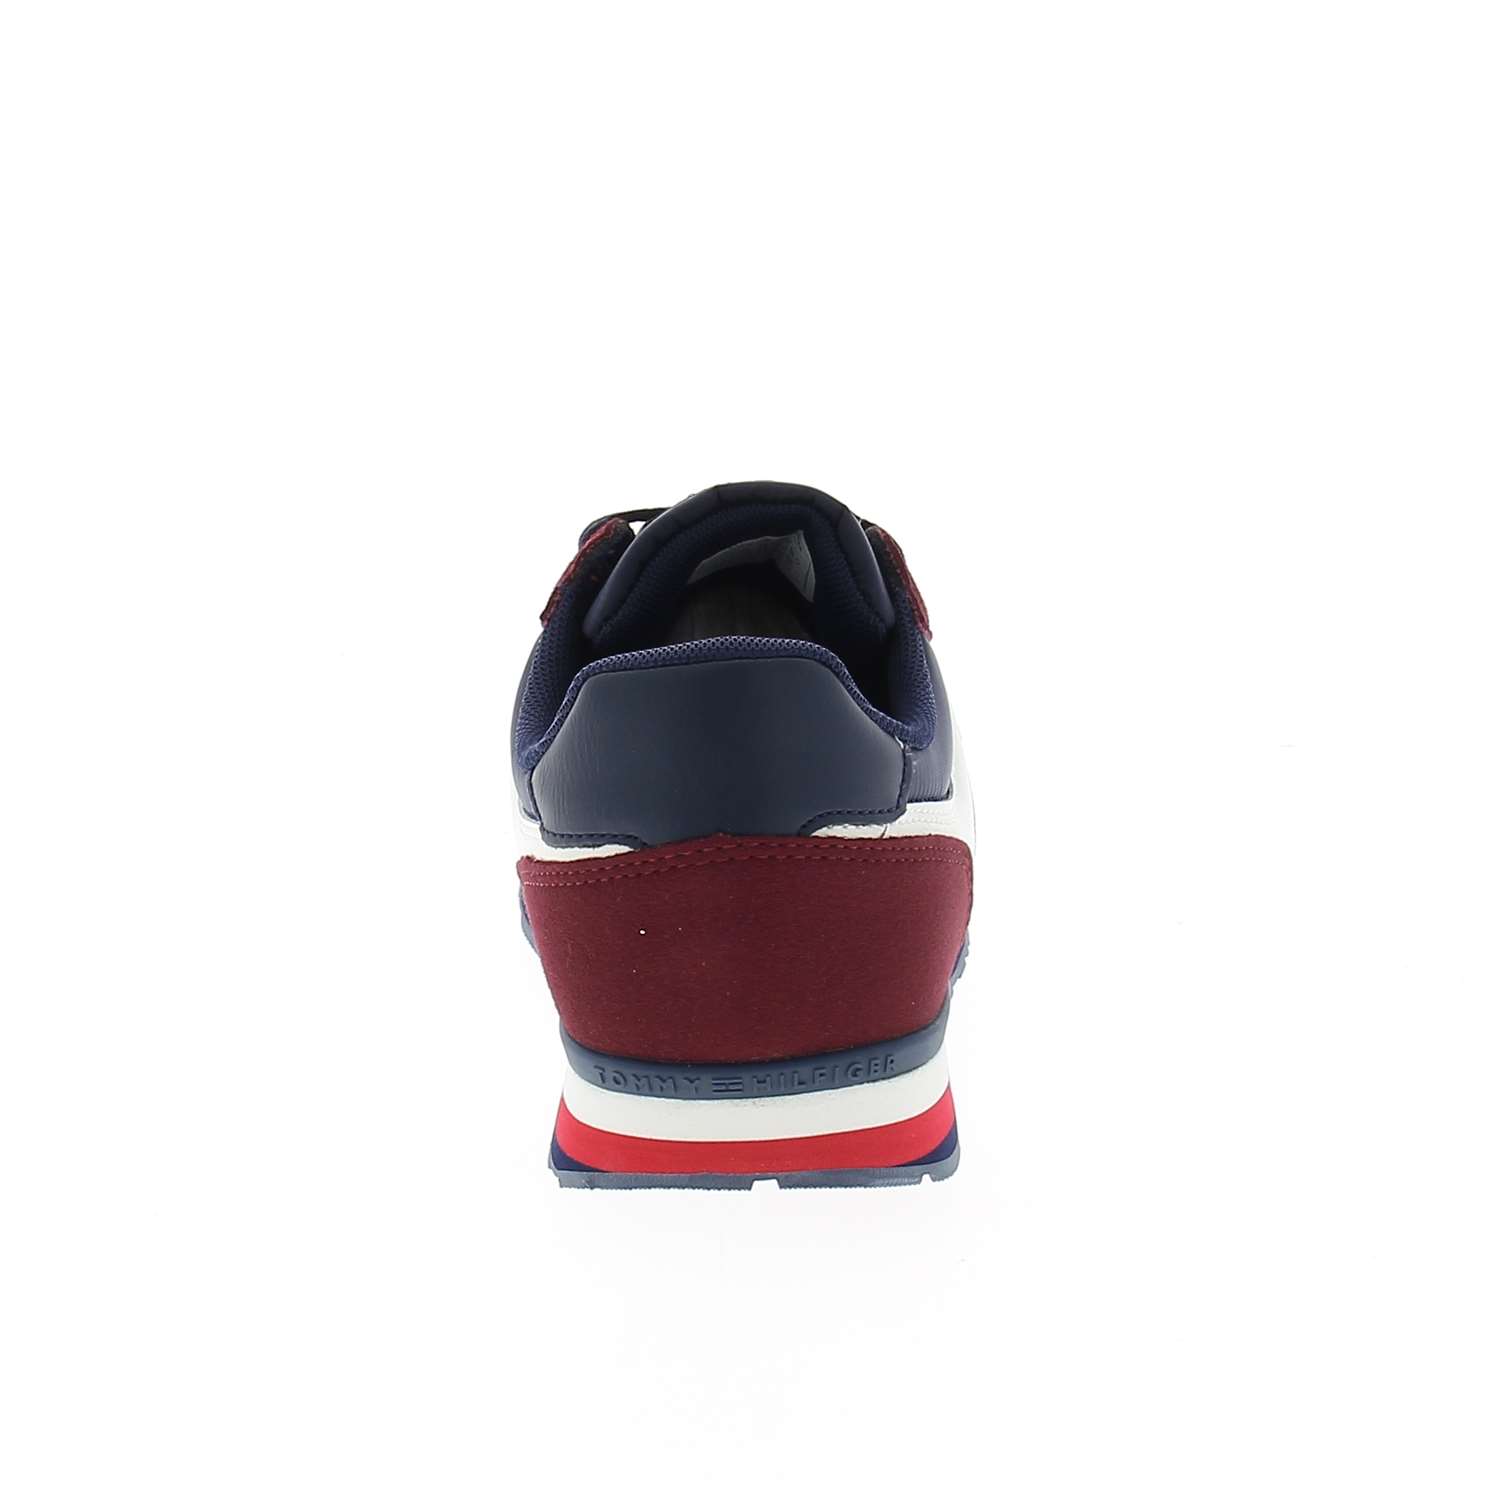 04 - NEWTON - TOMMY HILFIGER - Chaussures basses - Synthétique